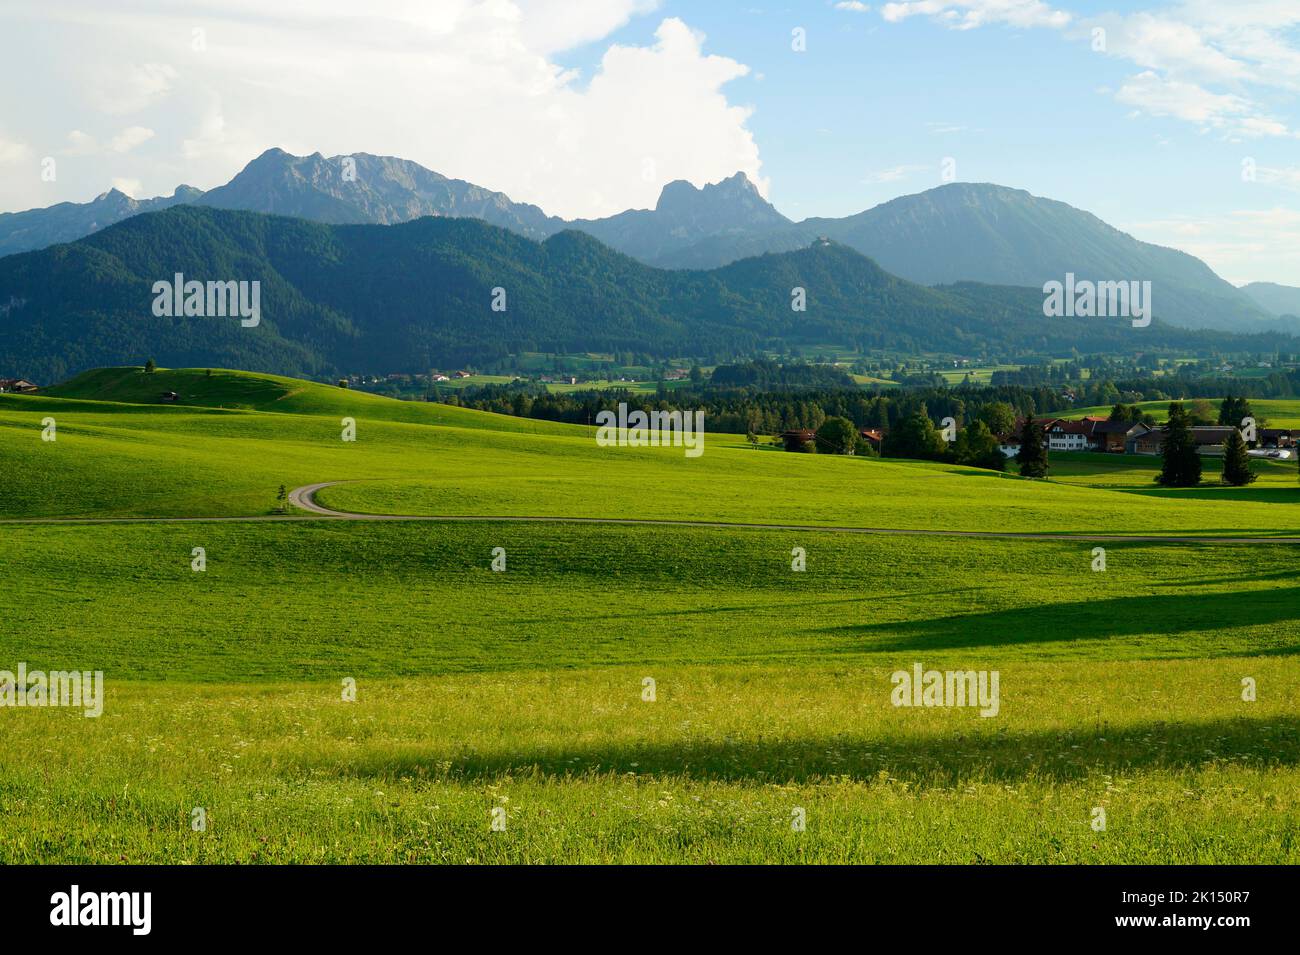 scenic, sunlit, lush green alpine meadows of the Allgaeu region in Bavaria with the Alps in the background Stock Photo